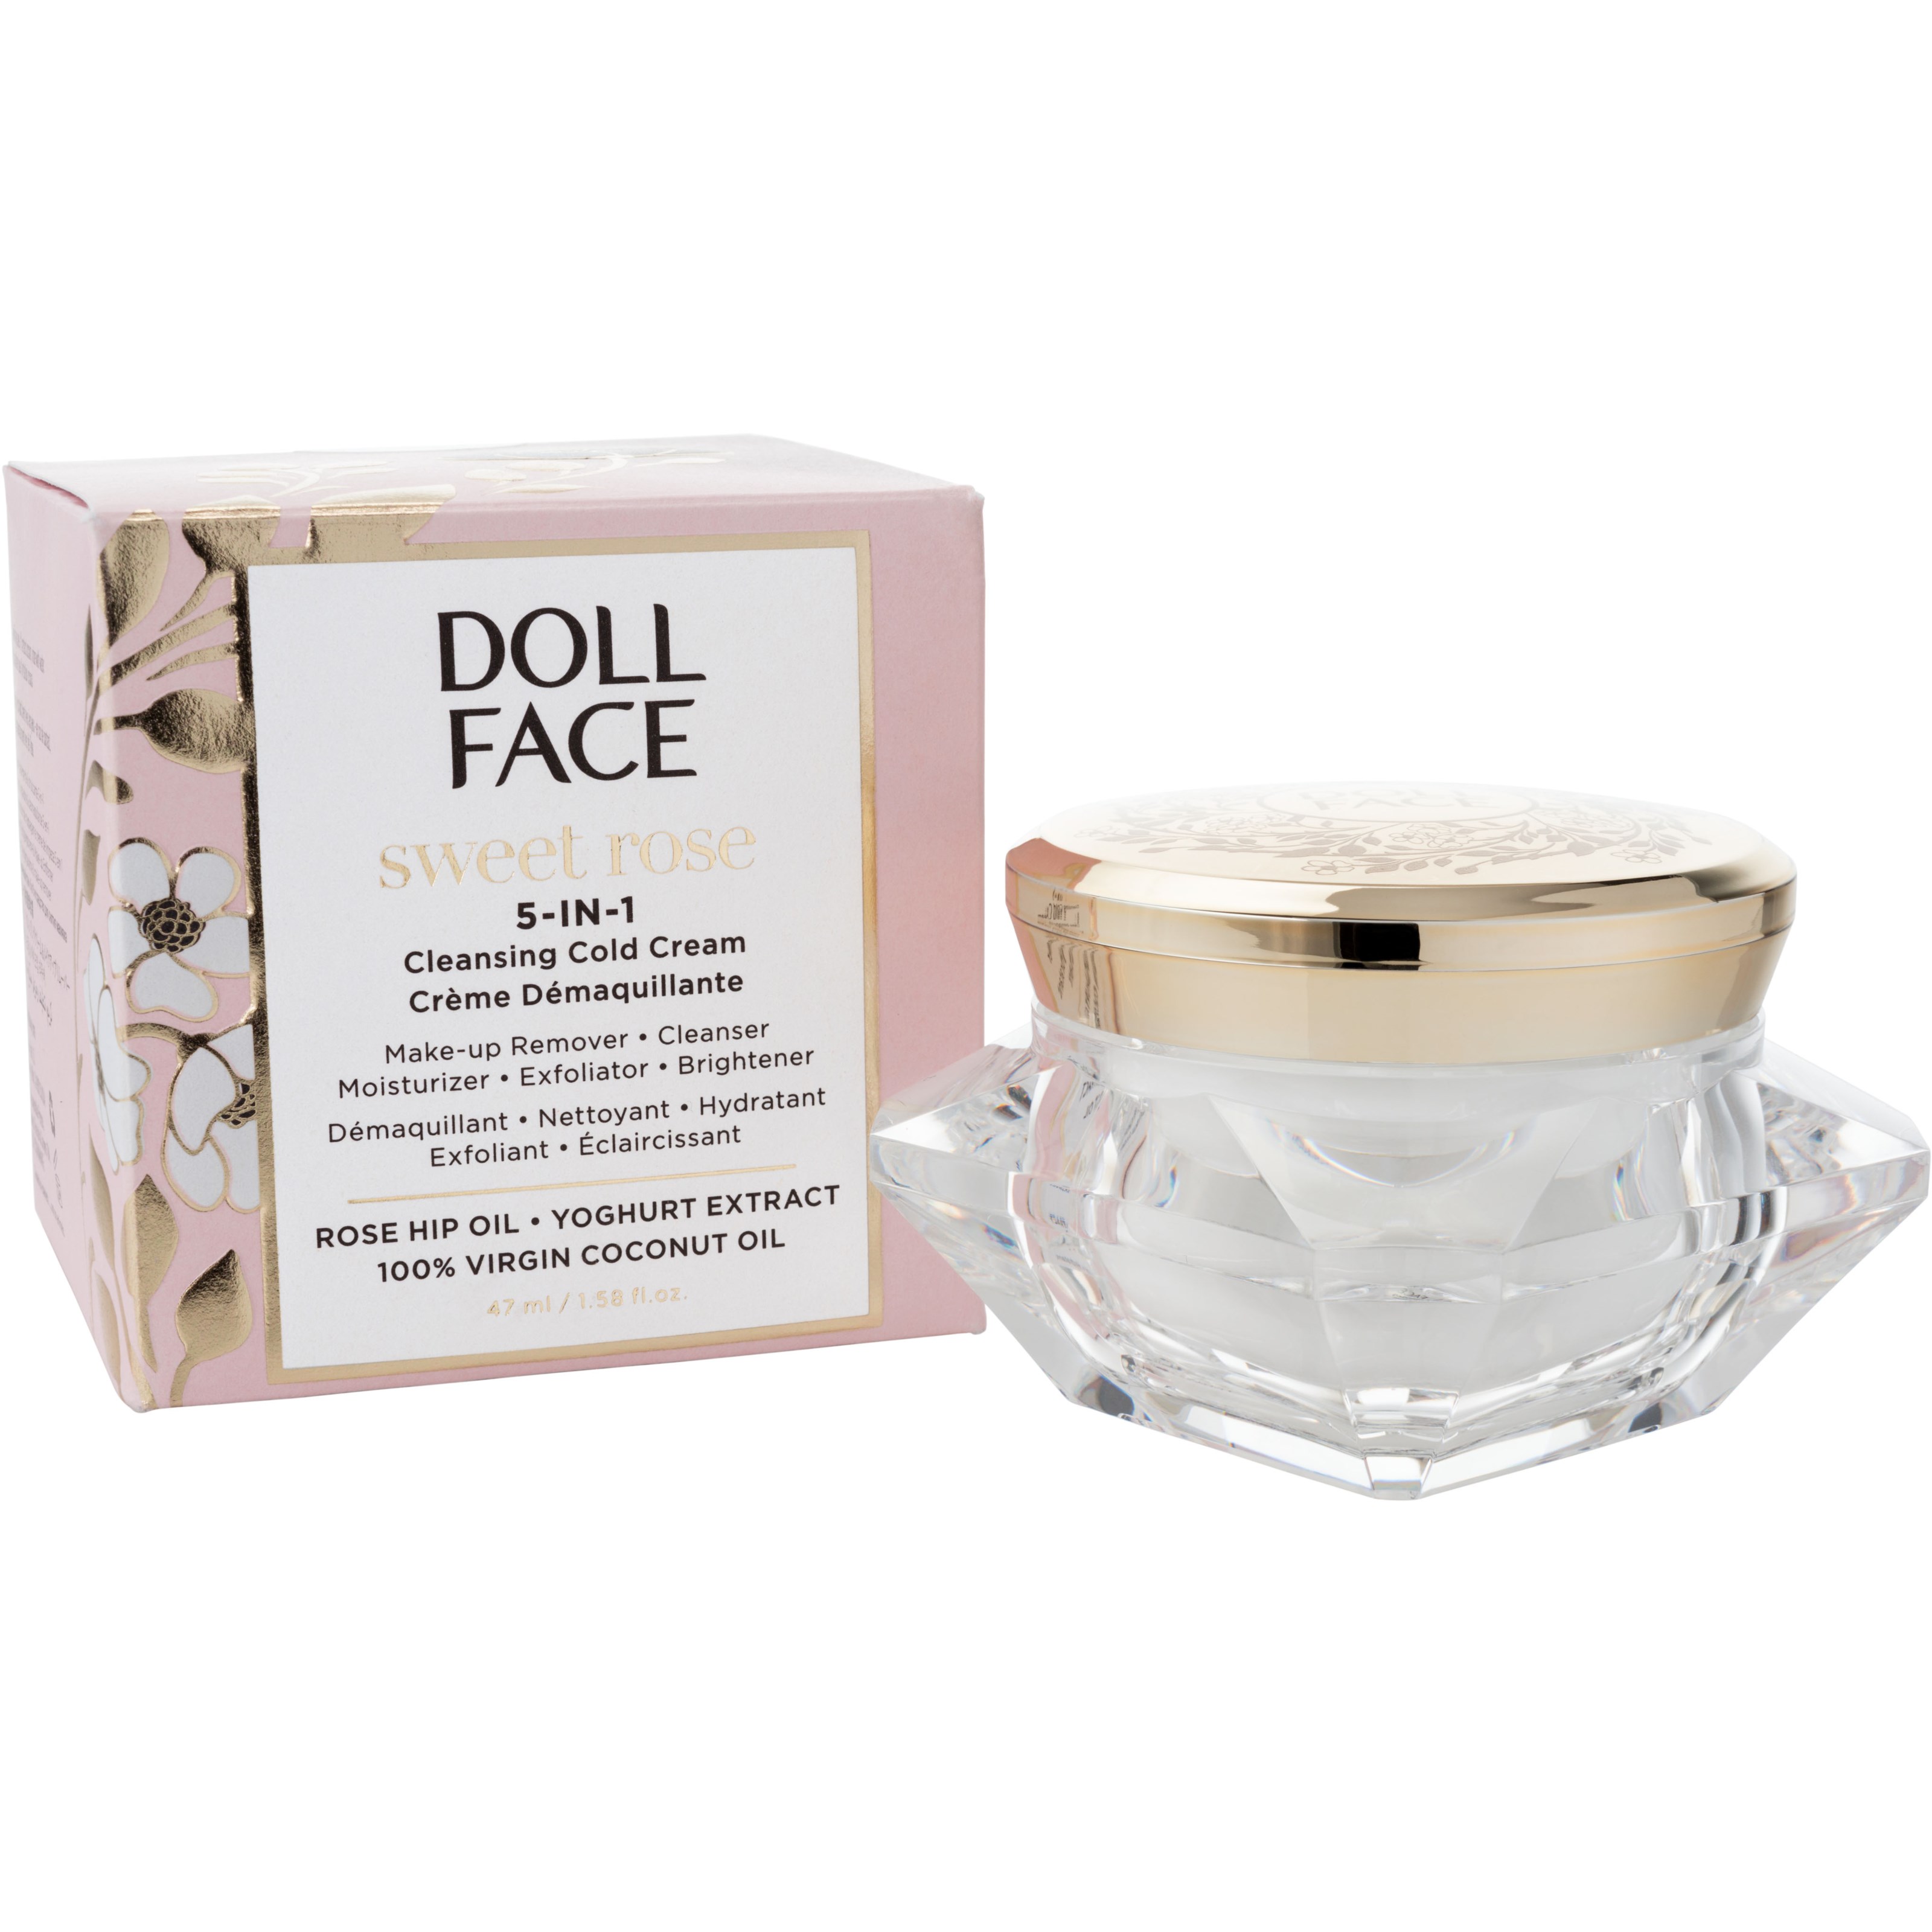 Doll Face Sweet Rose 5-in-1 Cleansing Cold Cream 47 ml